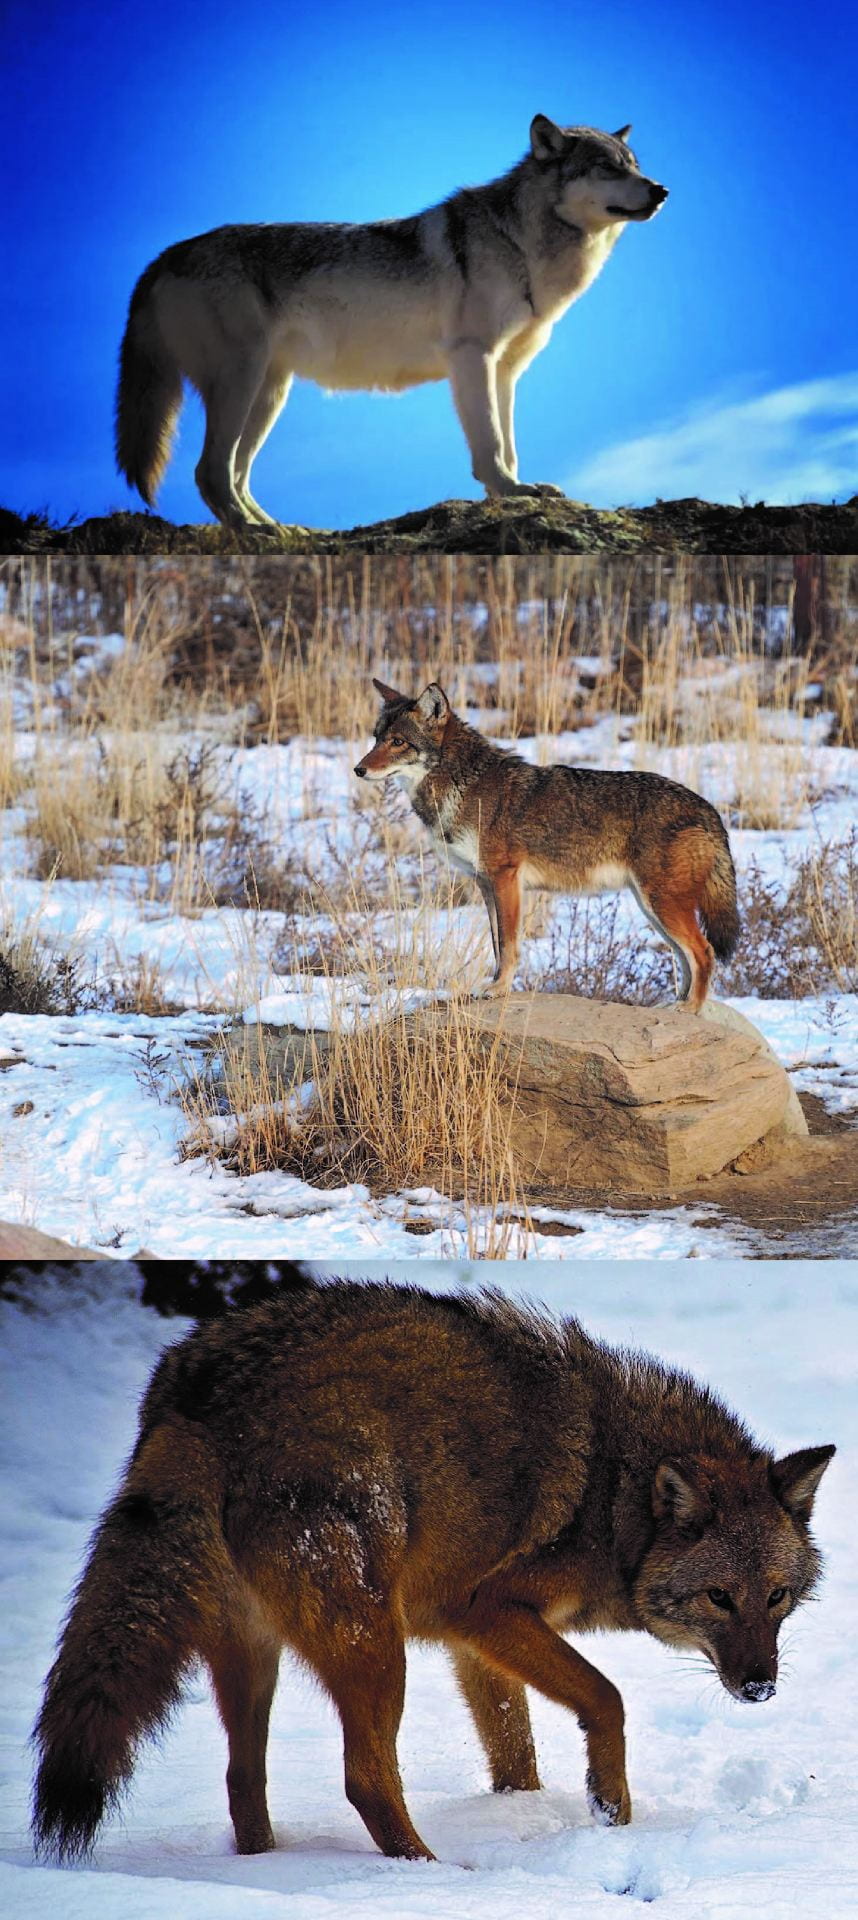 The top picture is a grey and white wolf standing on a rock against a deep blue sky. The second picture is a smaller, reddish coyote standing on a rock in a snowy field. The third picture is a reddish-brown coywolf walking on snow. This coywolf picture is the same as the feature image of this article. Wikimedia Commons (CC-BY-3.0)